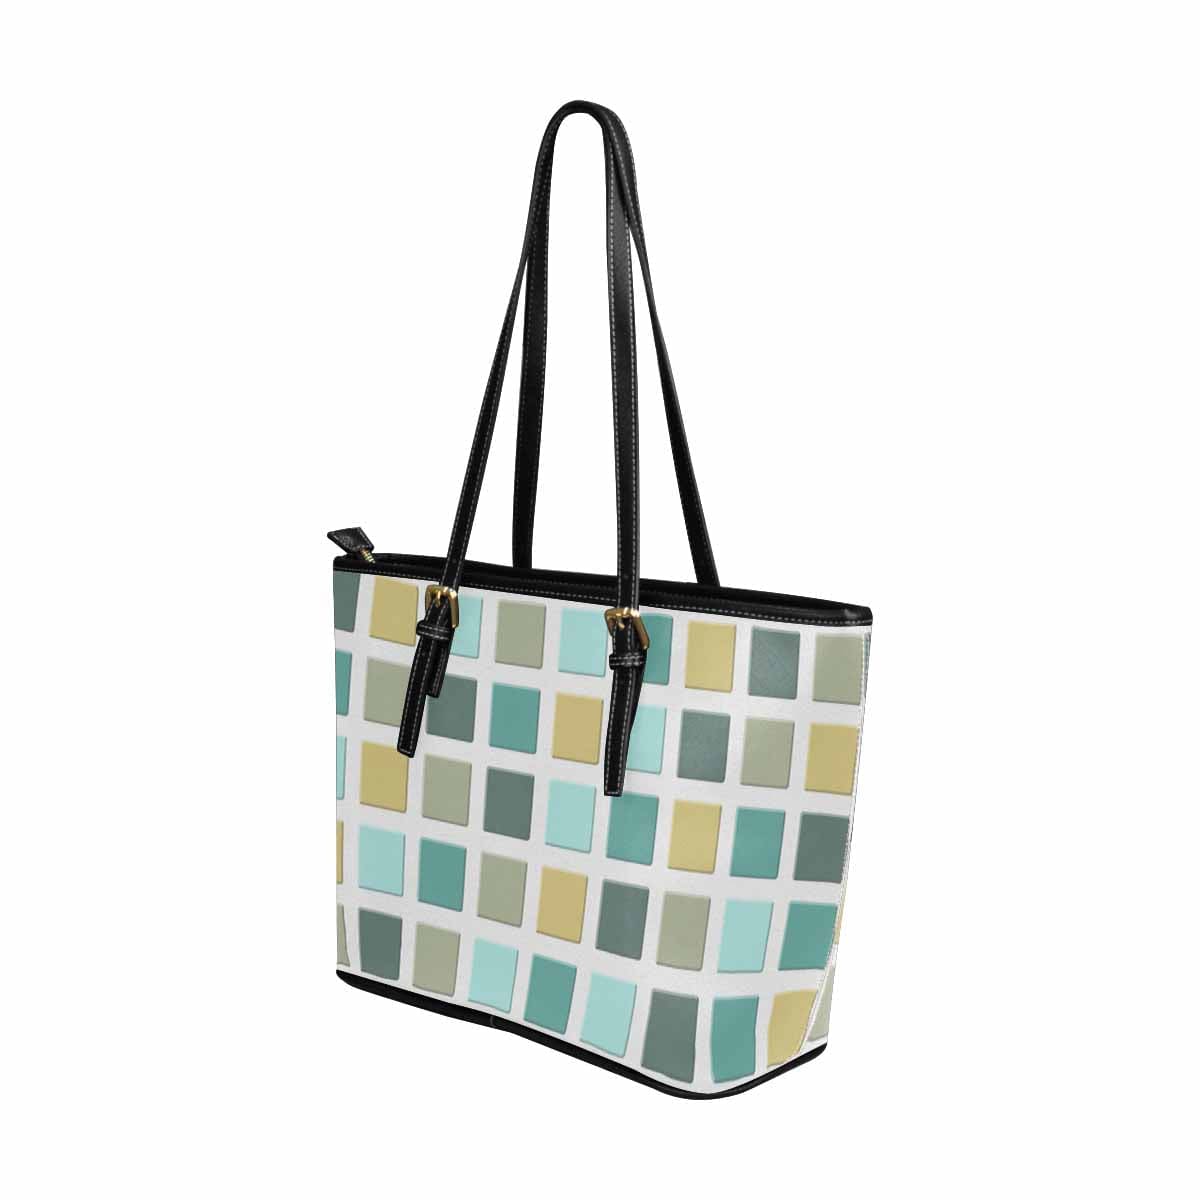 Large Leather Tote Shoulder Bag - Mosaic Tiles Green - Bags | Leather Tote Bags